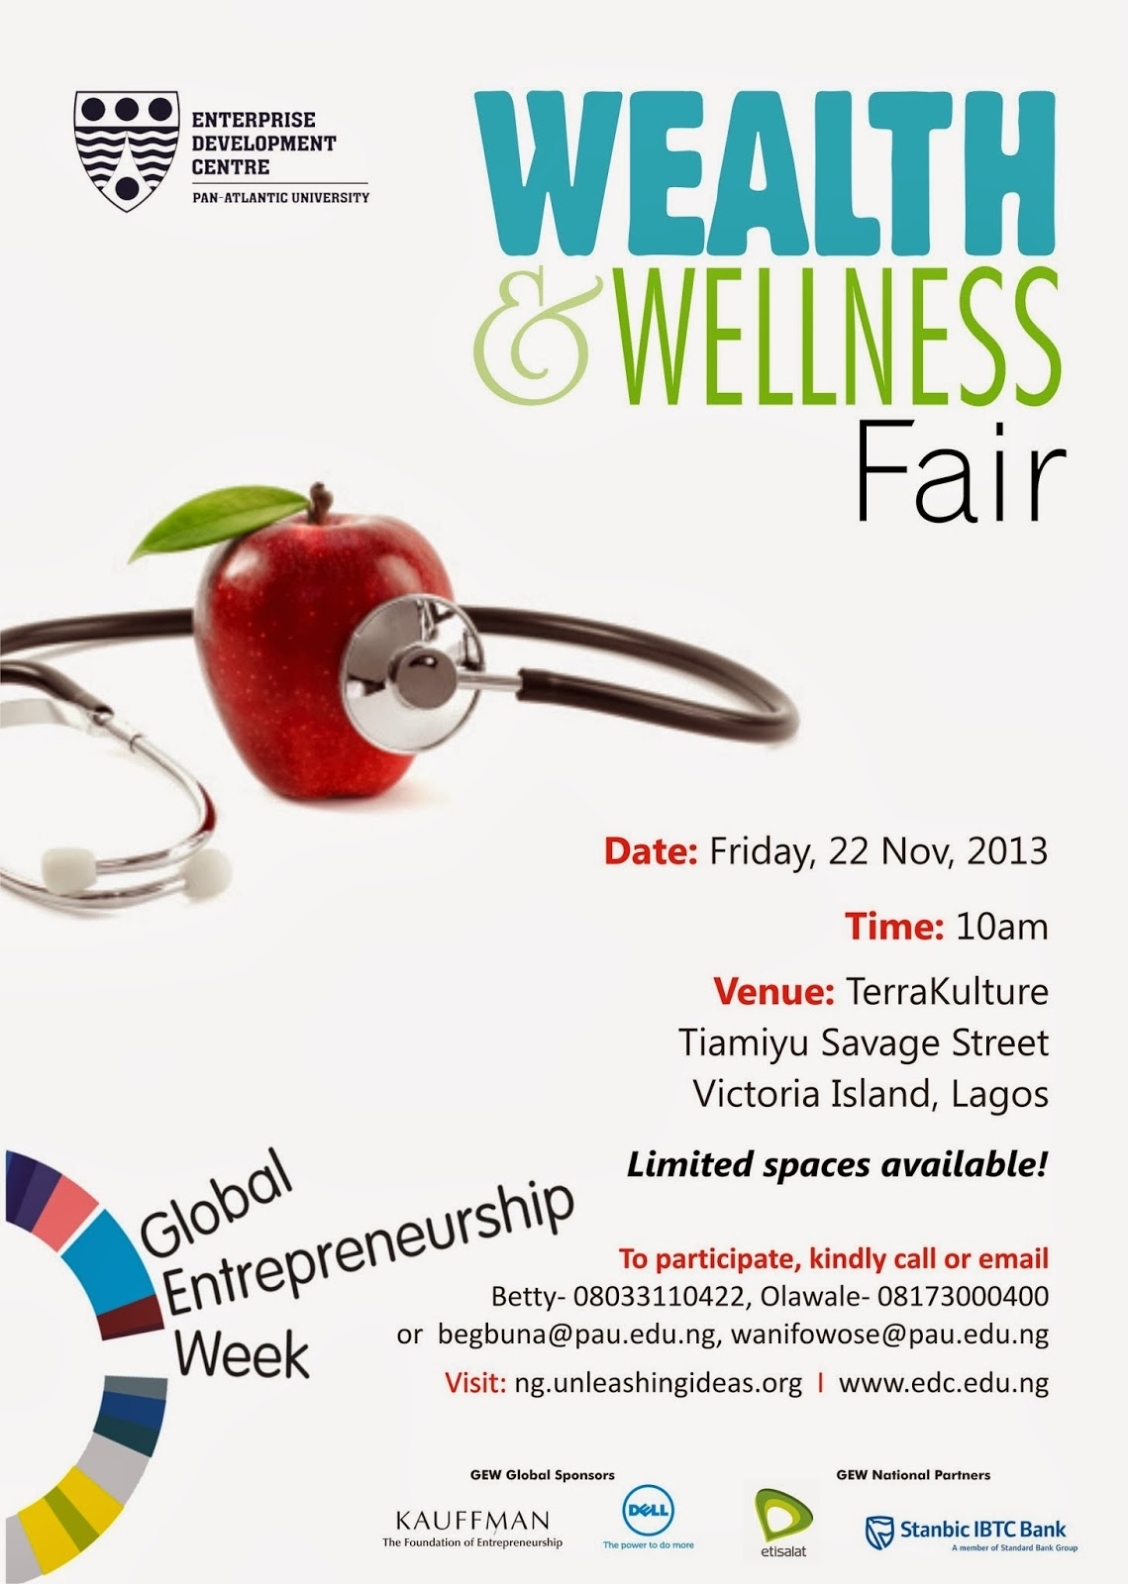 Enterprise Development Centre: Gewng2013: Day 5, Wealth And Wellness Fair Intended For Health And Wellness Flyer Template